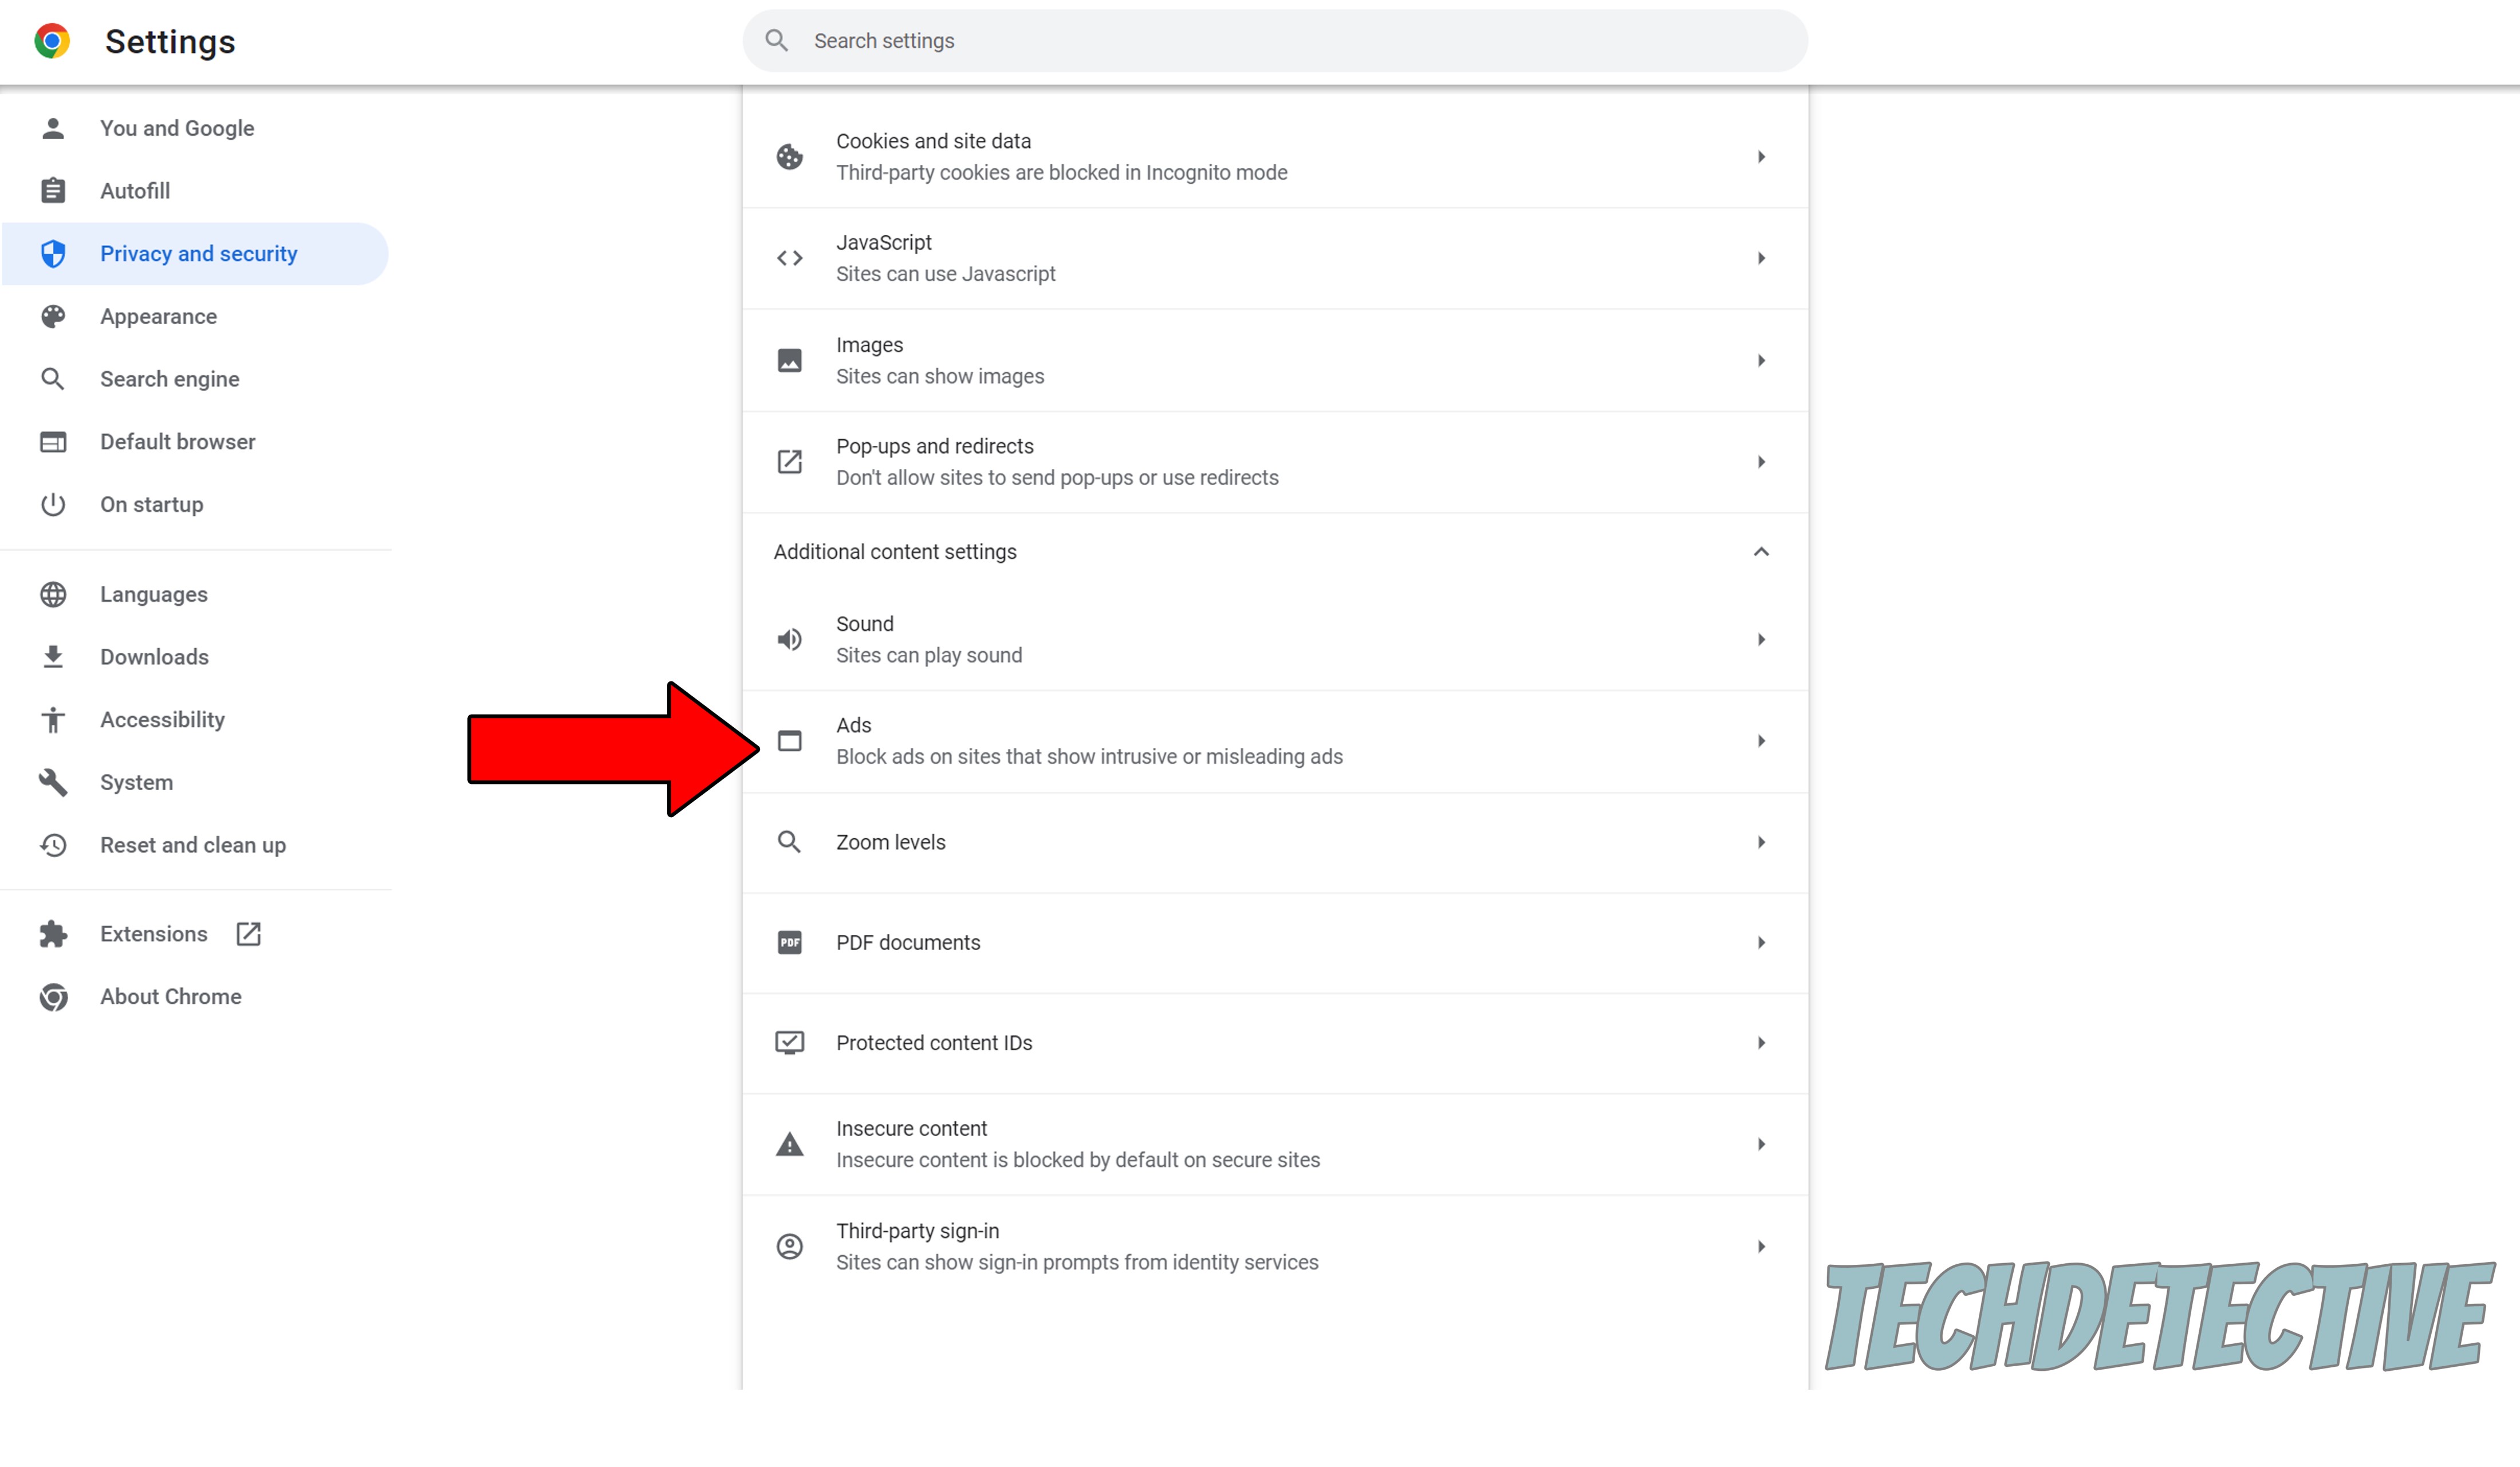 How to edit ad settings on Google Chrome